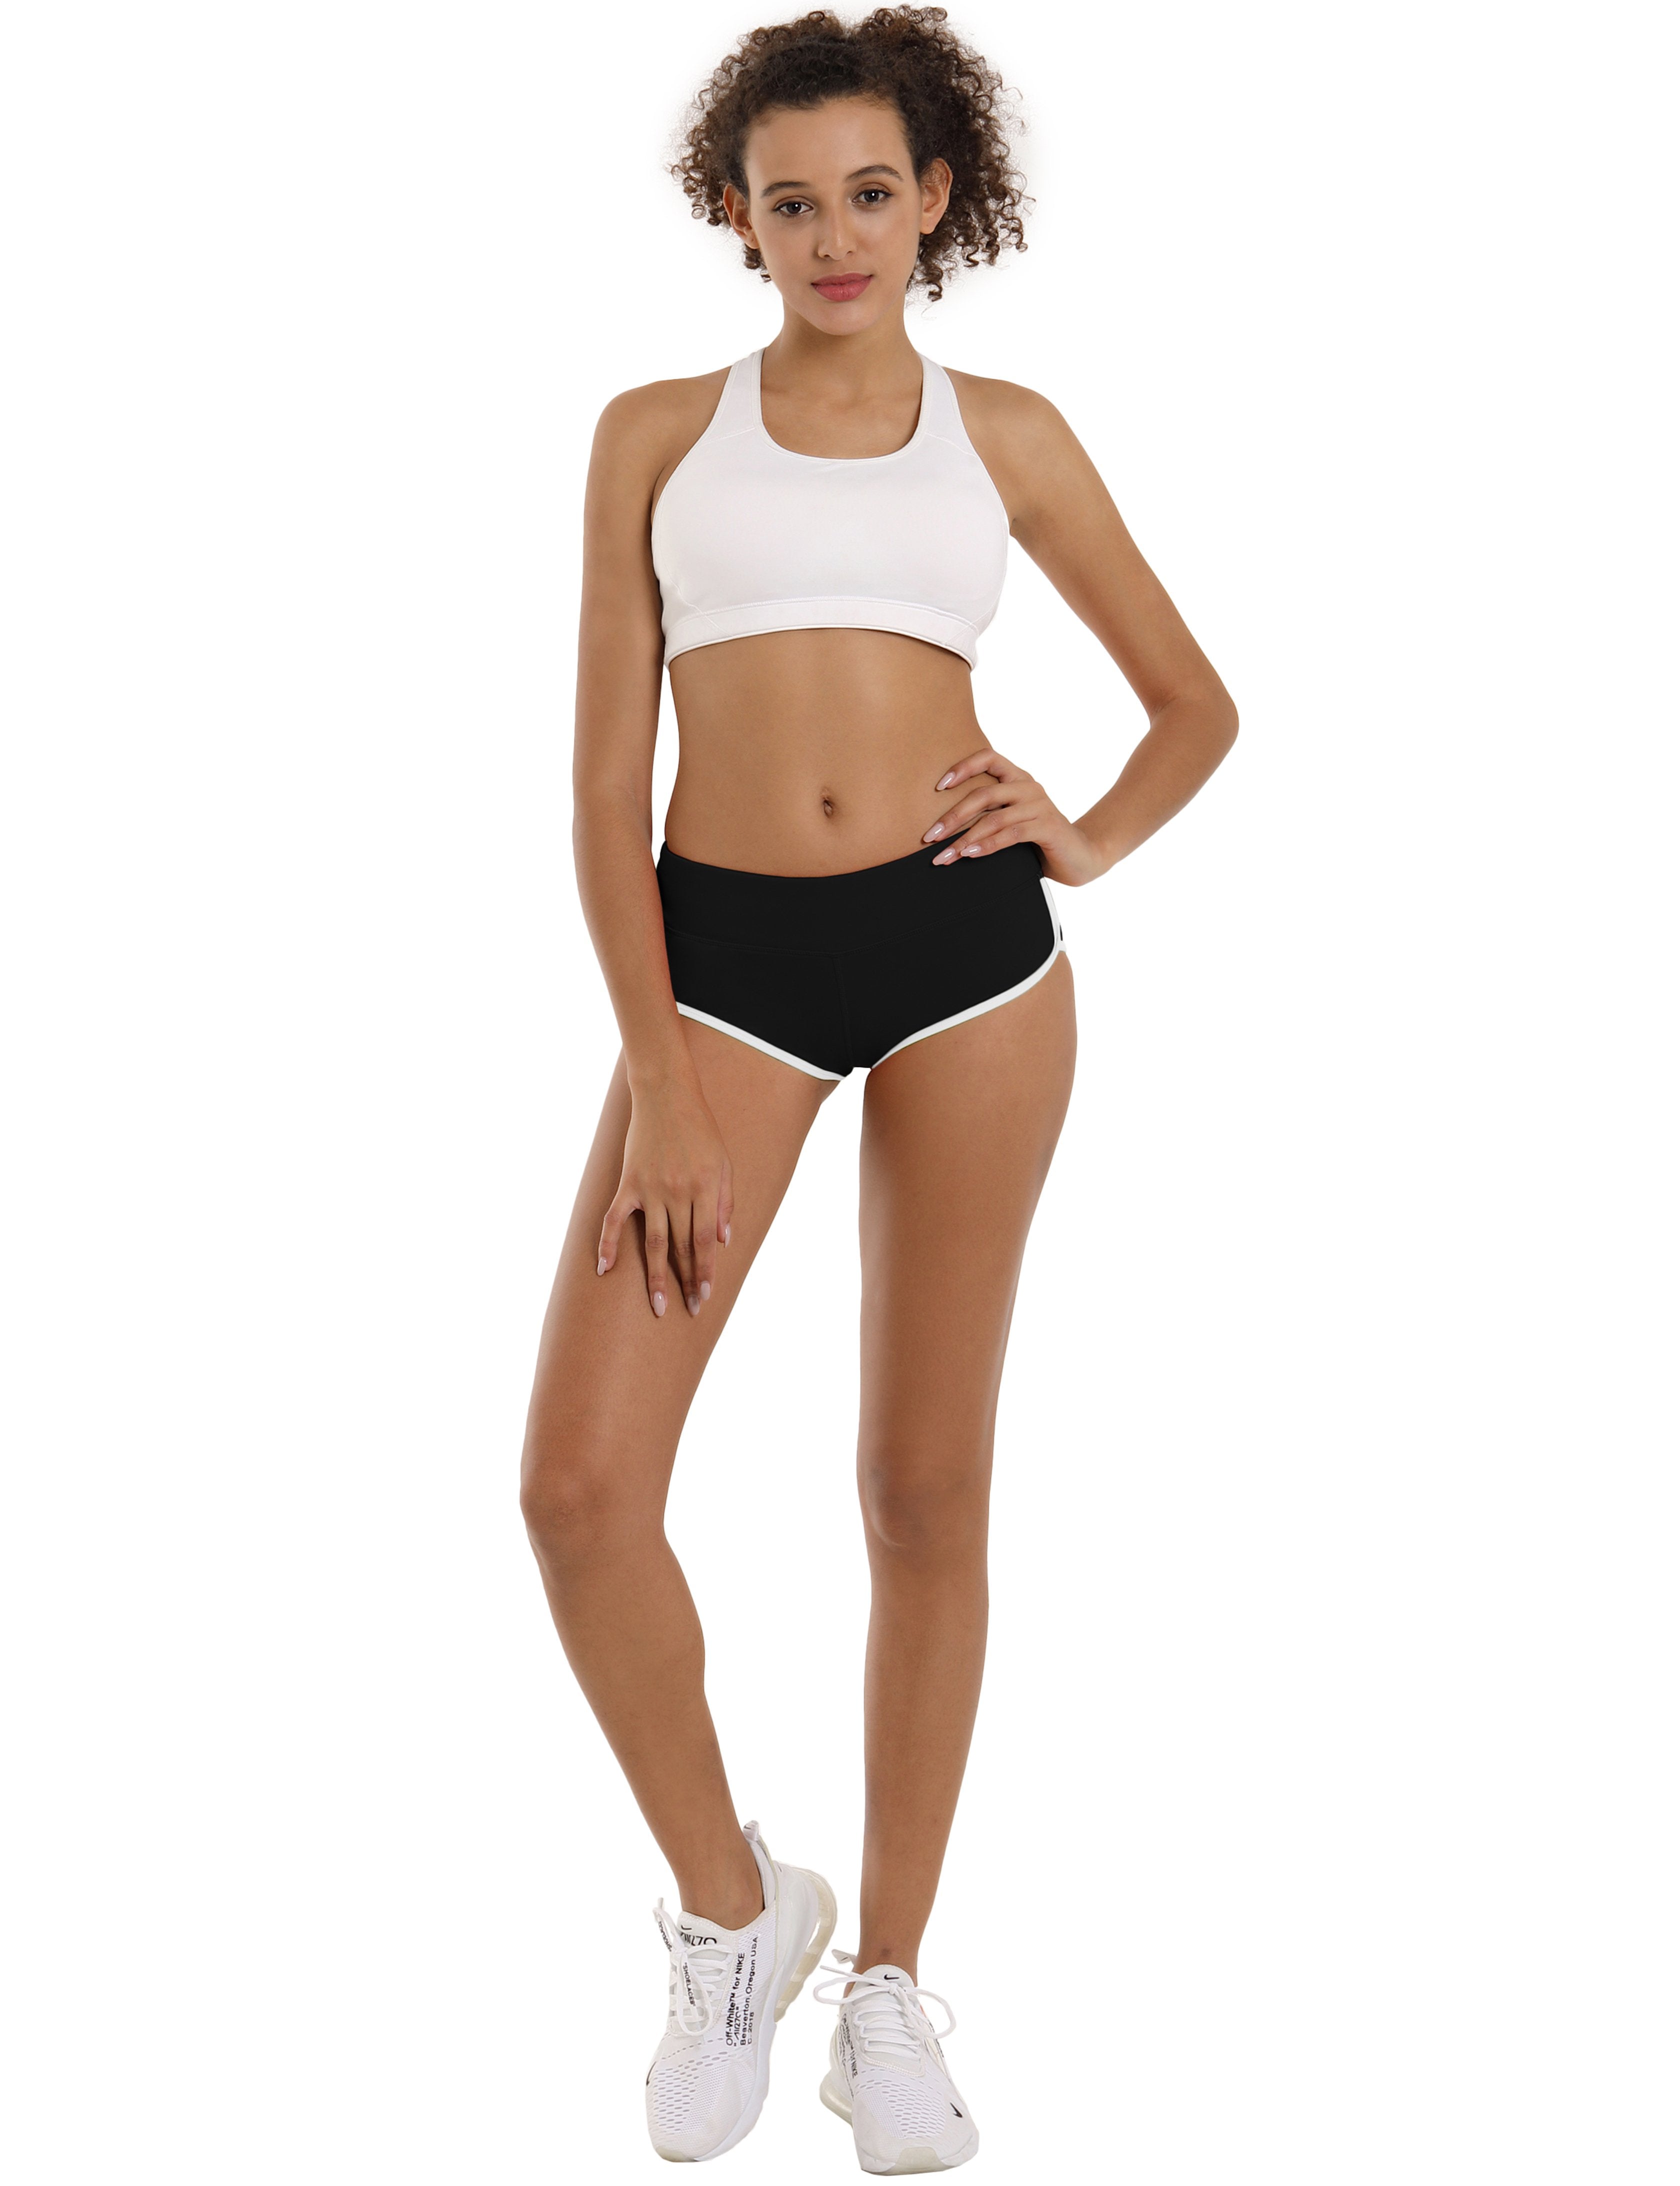 Sexy Booty Tall Size Shorts black Sleek, soft, smooth and totally comfortable: our newest sexy style is here. Softest-ever fabric High elasticity High density 4-way stretch Fabric doesn't attract lint easily No see-through Moisture-wicking Machine wash 75%Nylon/25%Spandex